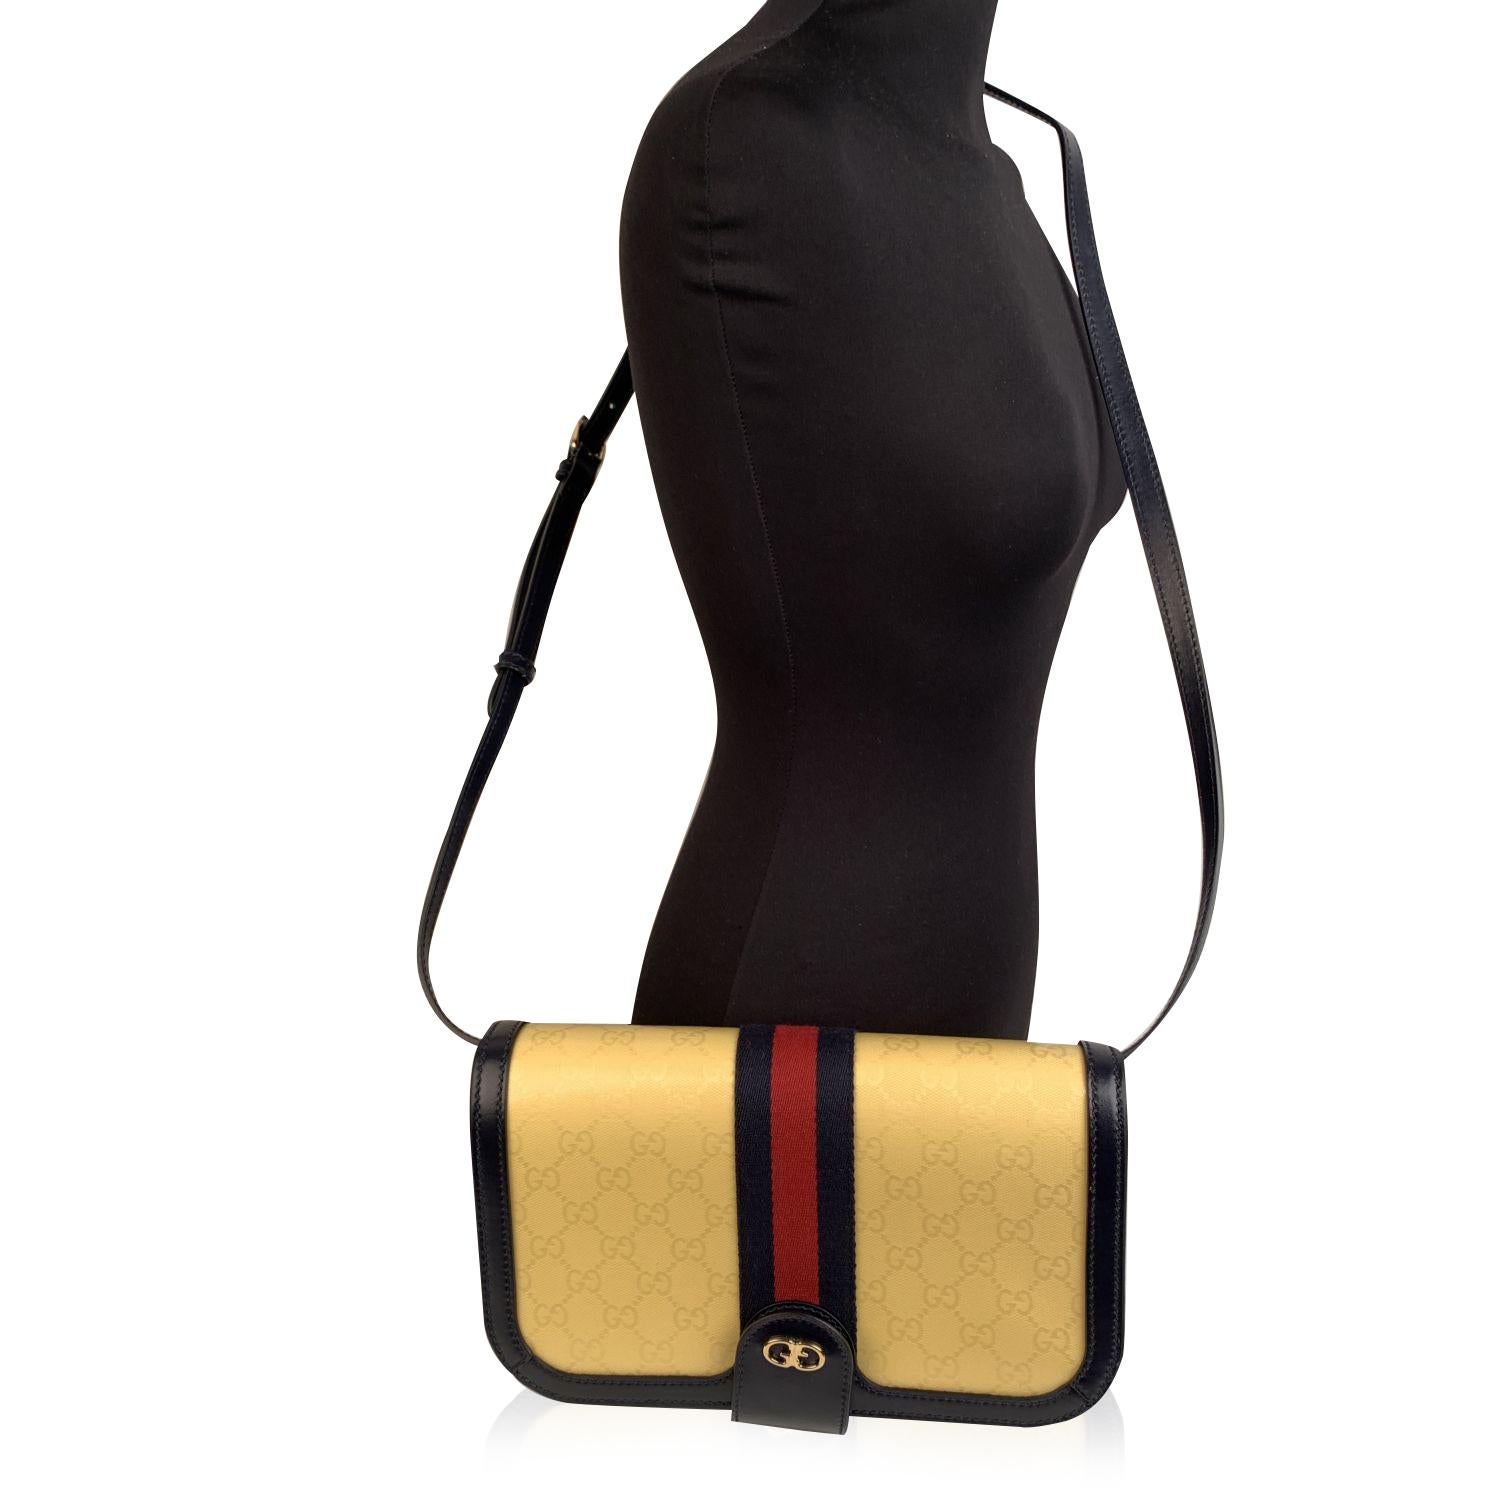 Beautiful 'Ophidia Compartment GG Imprime' Messenger Bag by Gucci, crafted in yellow GG monogram canvas with navy blue genuine leather trim. It features blue/red/blue signature web around the bag and gold metal GG - GUCCI logo on the front. Flap